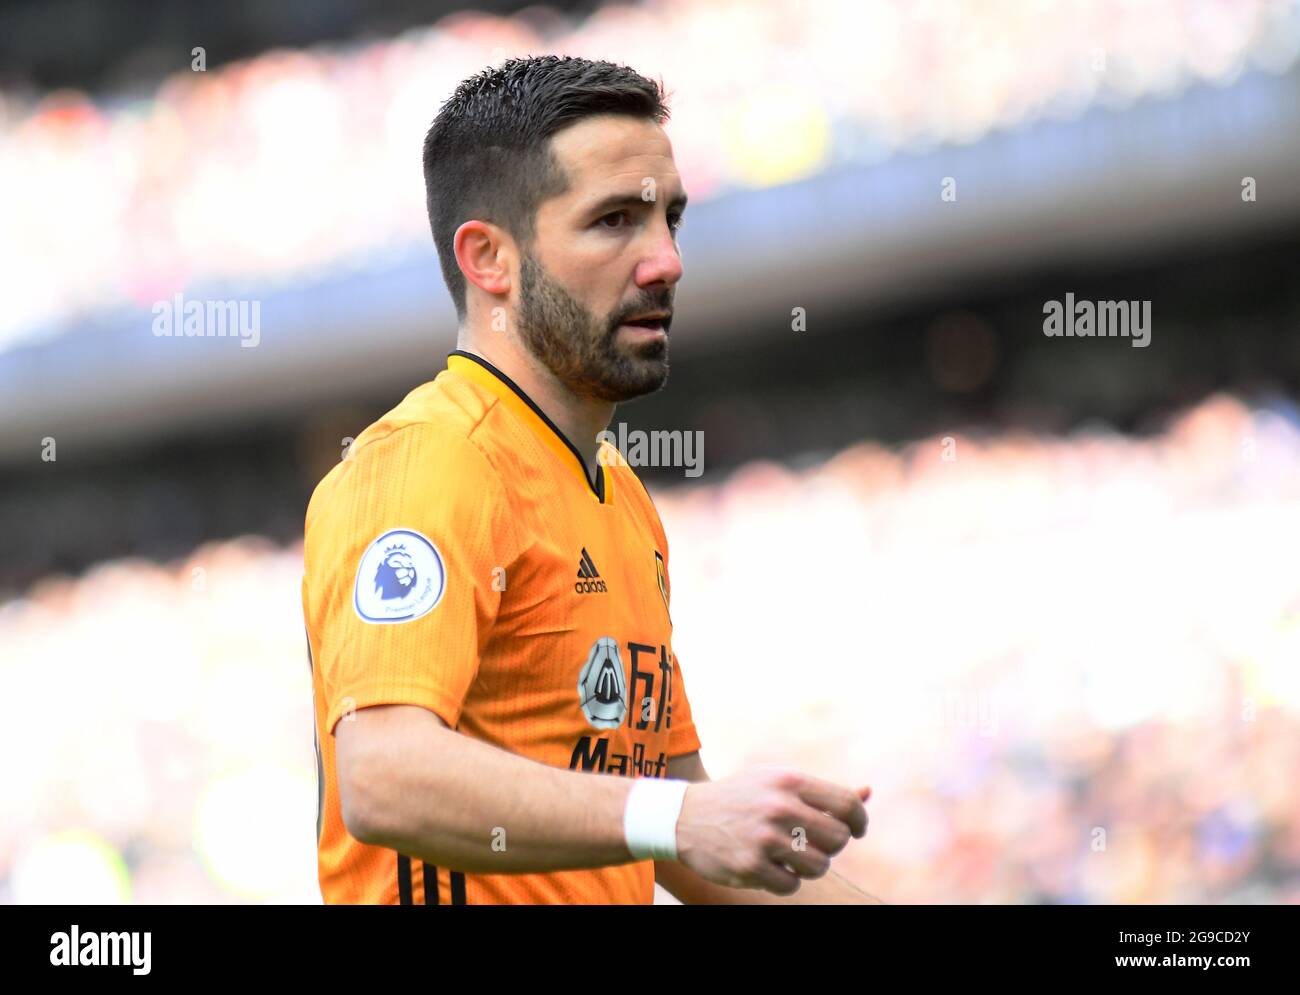 LONDON, ENGLAND - MArch 1, 2020: Joao Moutinho of Wolverhampton pictured during the 2020/21 Premier League game between Tottenham Hotspur FC and Wolverhampton FC at Tottenham Hotspur Stadium. Stock Photo